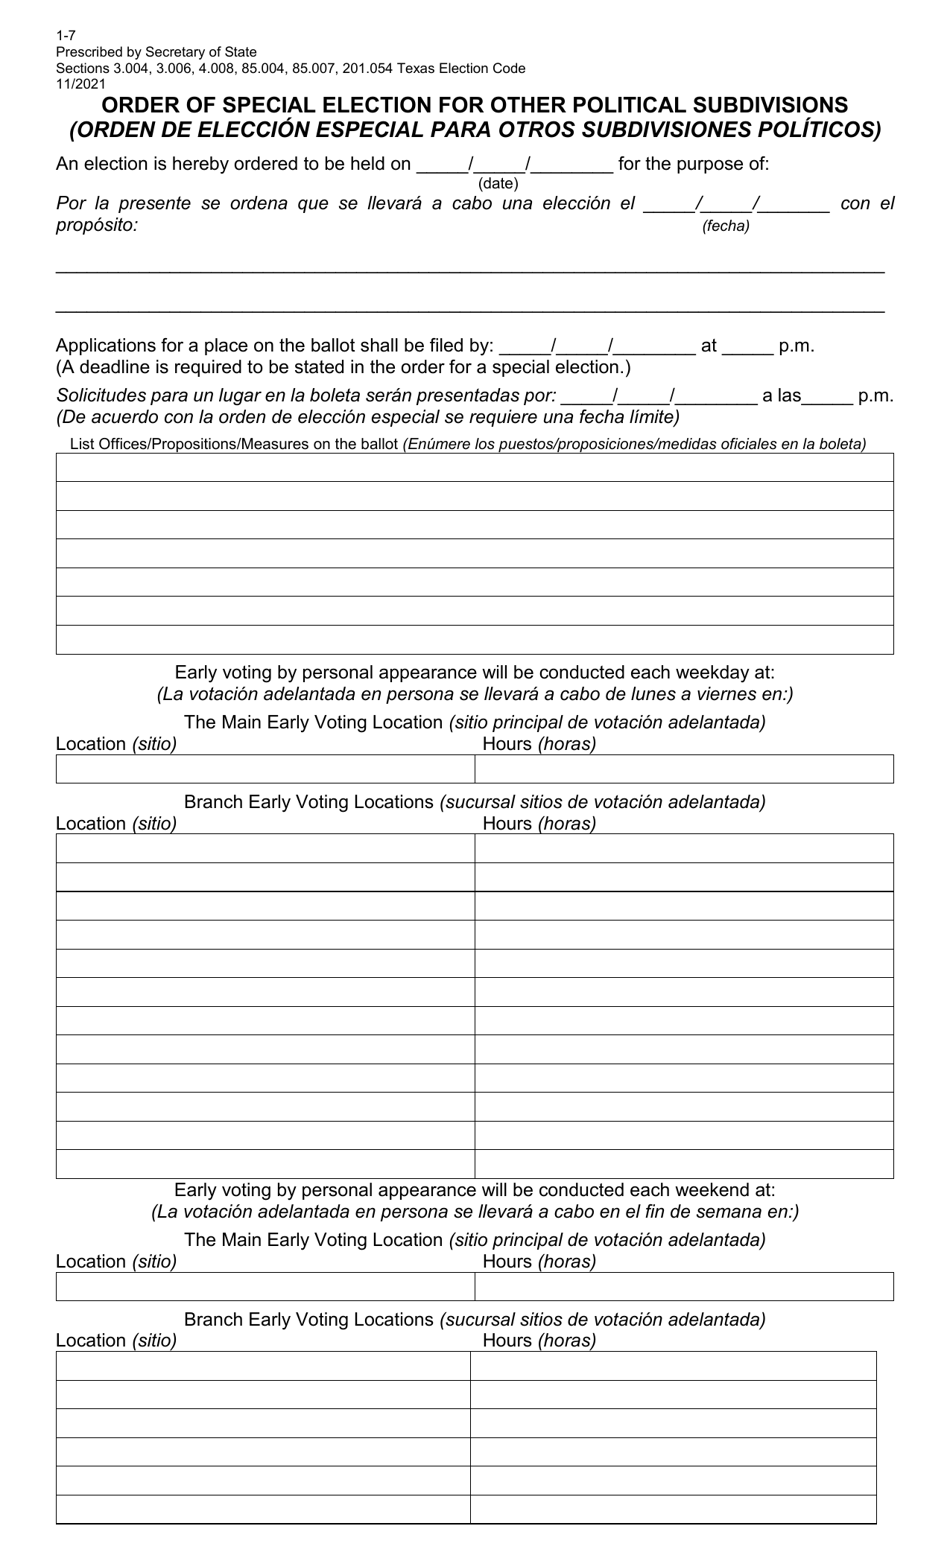 Form 1-7 Order of Special Election for Other Political Subdivisions - Texas (English / Spanish), Page 1